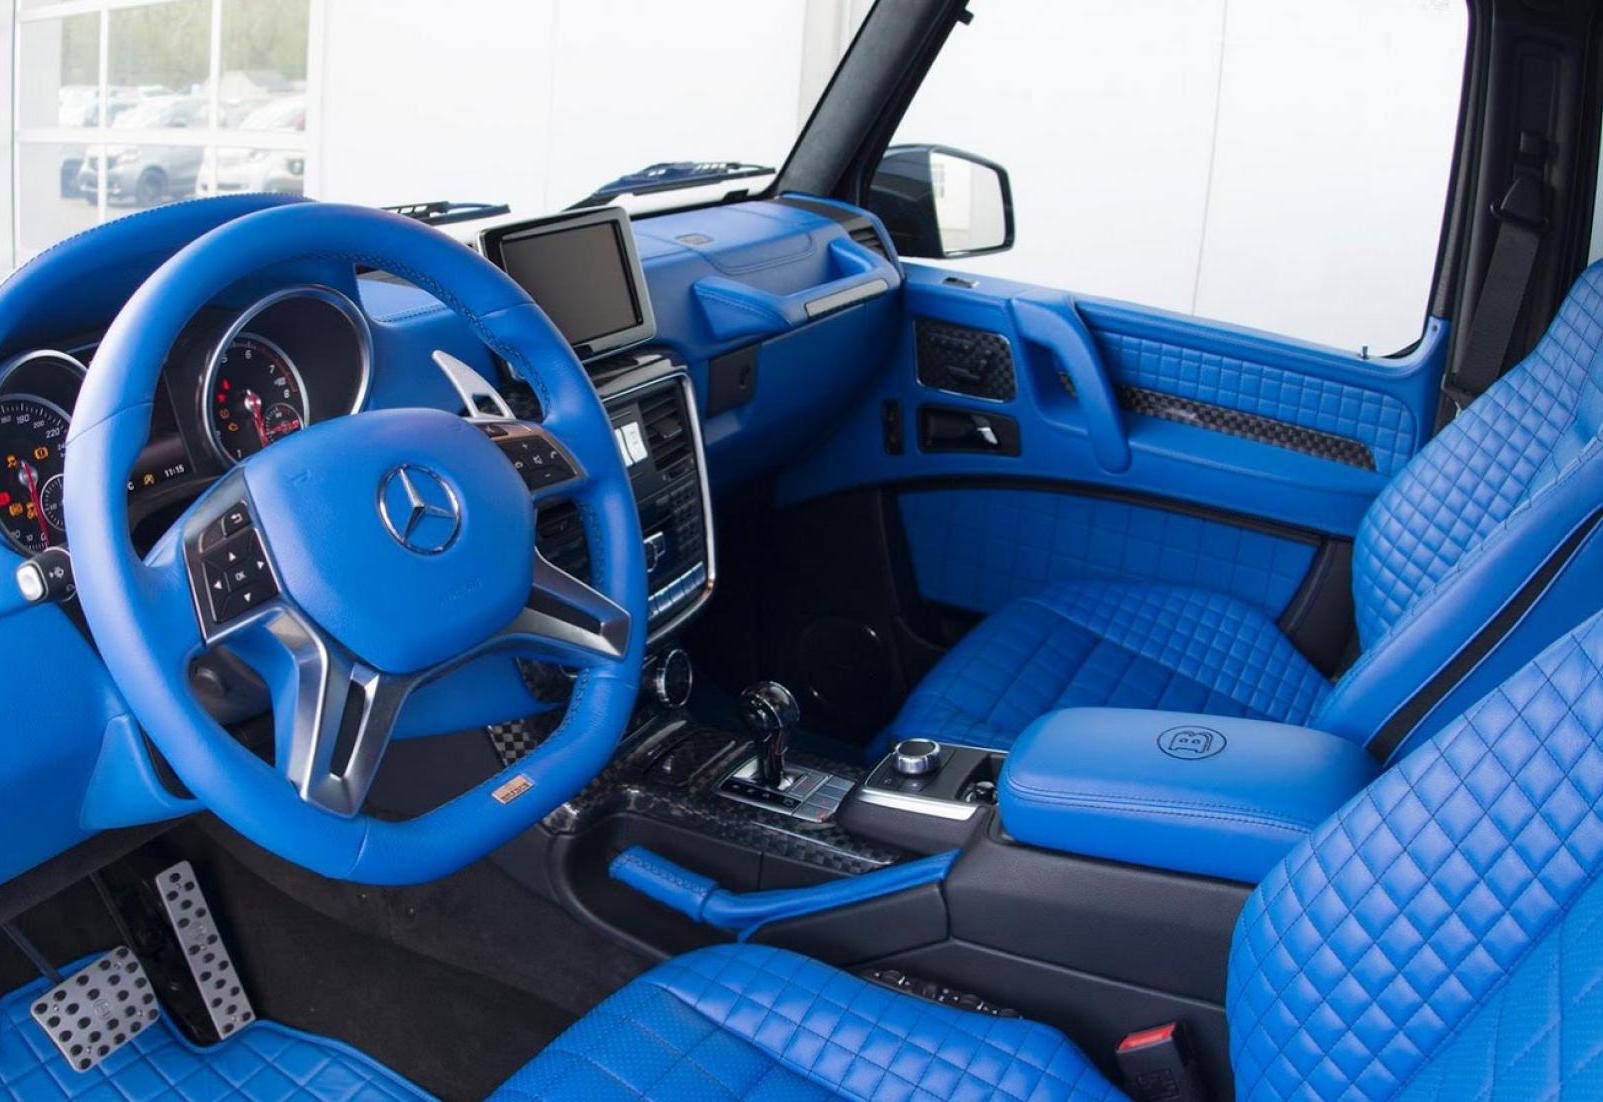 How do you maintain the elegance of leather seats?